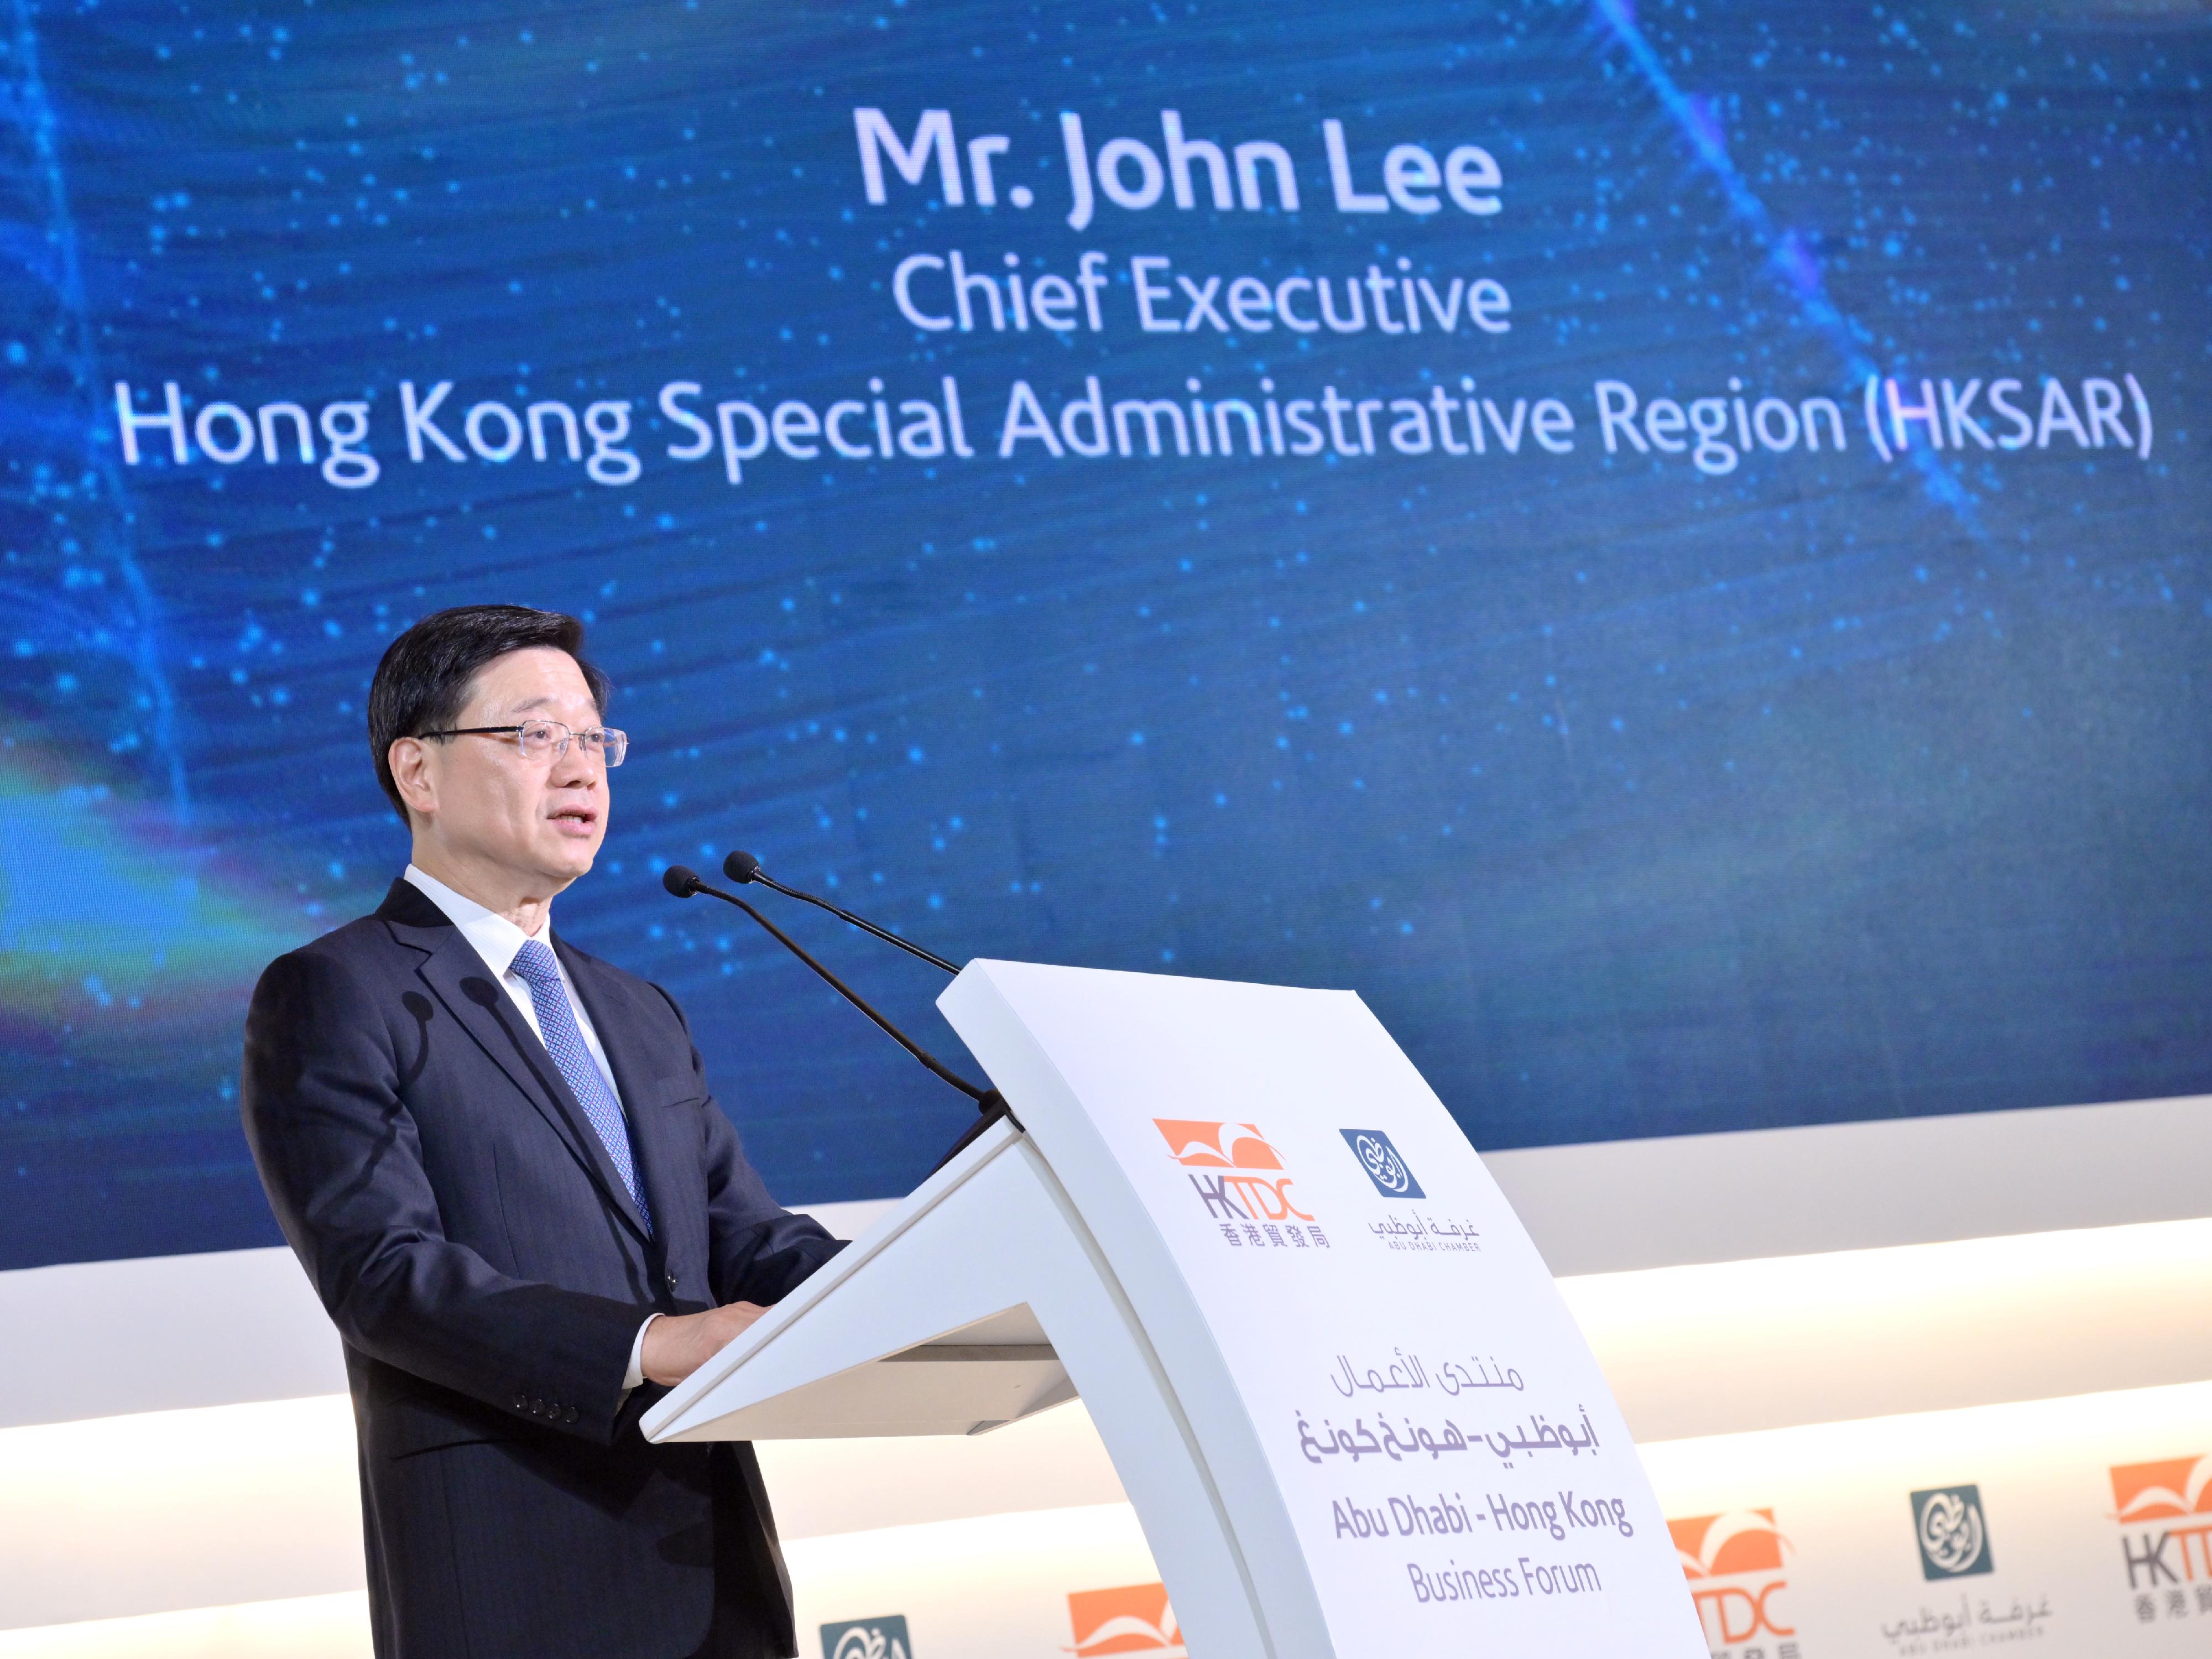 The Chief Executive, Mr John Lee, speaks at the Abu Dhabi-Hong Kong Business Forum and networking luncheon hosted by the Abu Dhabi Chamber of Commerce and Industry in Abu Dhabi, the United Arab Emirates today (February 7, Abu Dhabi time).